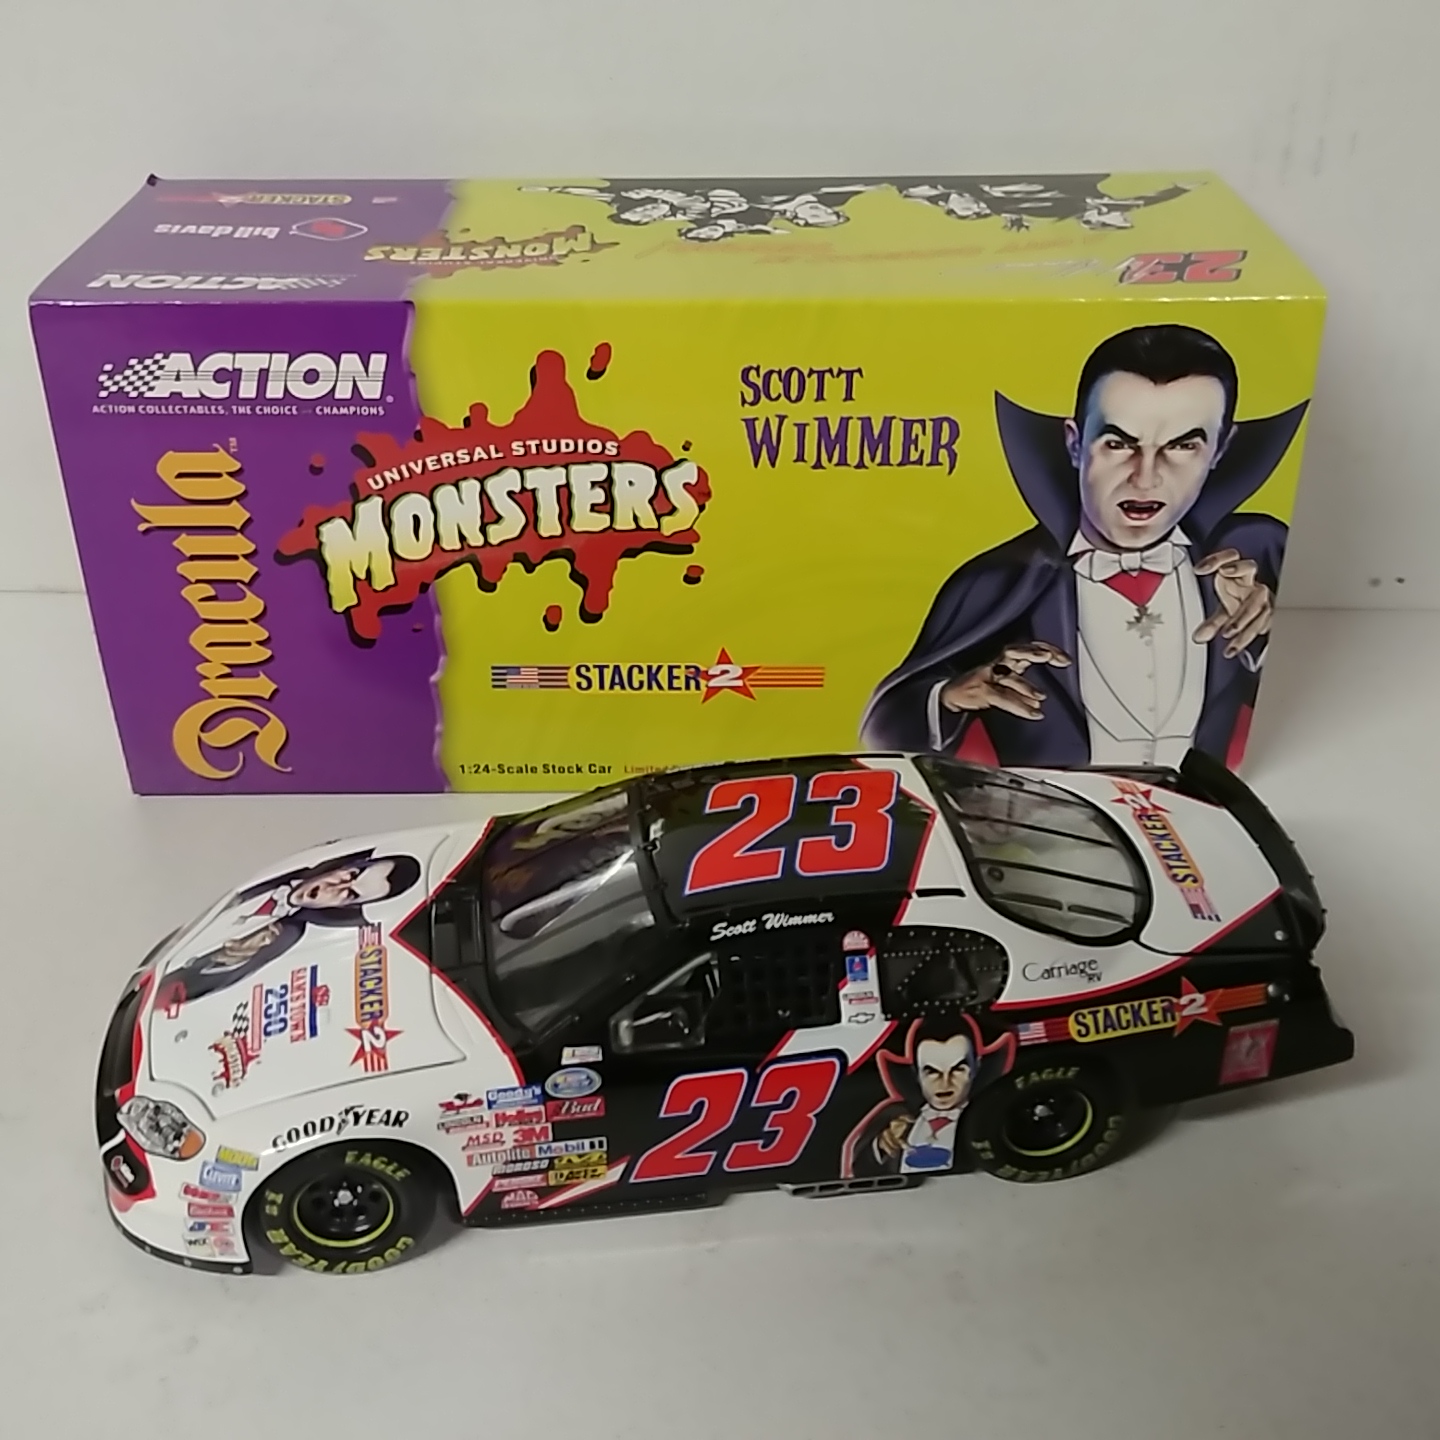 2003 Scott Wimmer 1/24th Stacker 2 "Monsters Dracula" c/w car